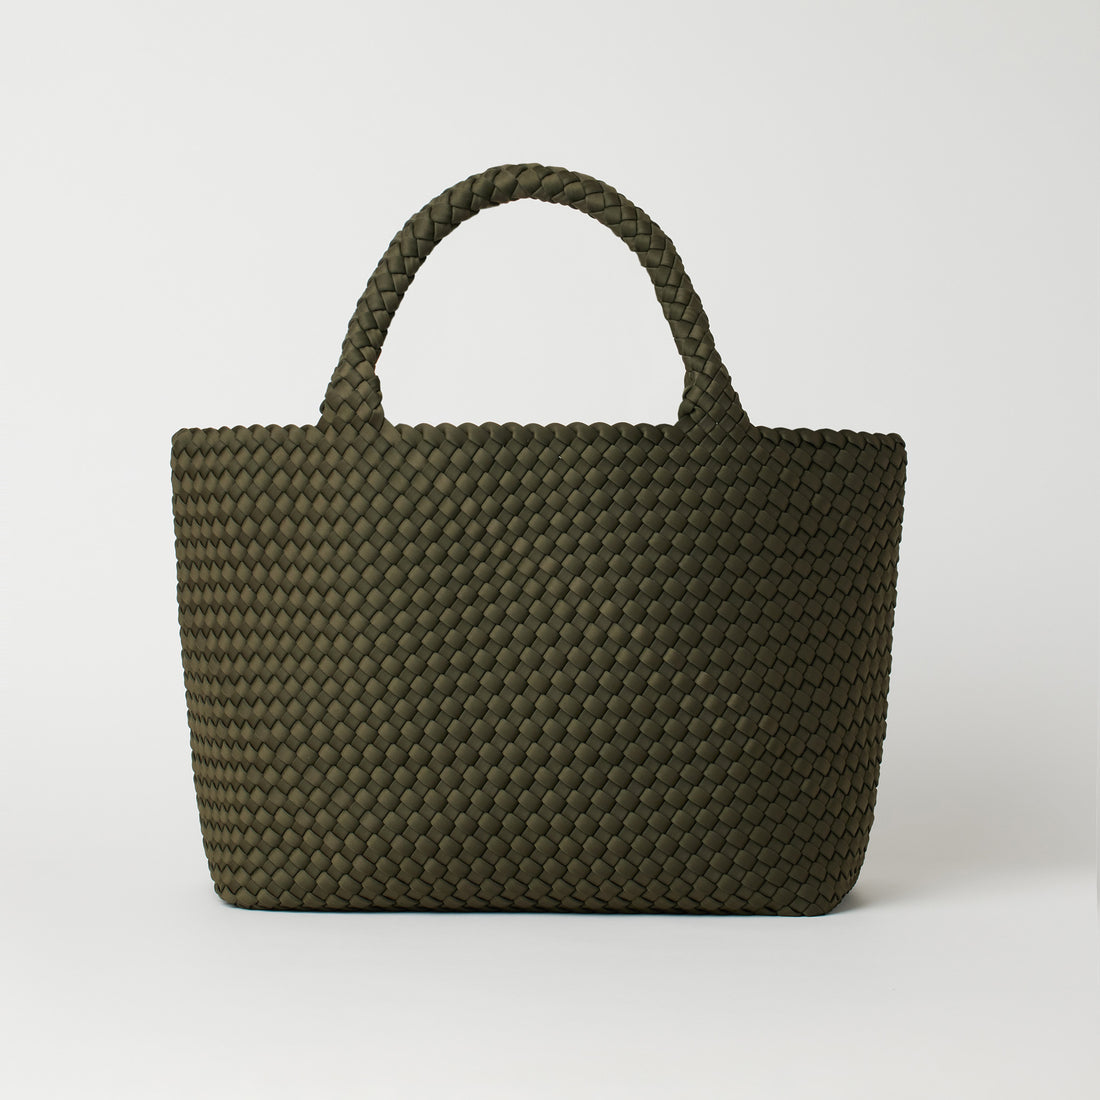 Andreina Bags Siempre tote bag in army green colour. Large size yet lightweight. Handmade, interlaced material, synthetic material, water resistant, machine washable. Designed in Sydney, Australia.